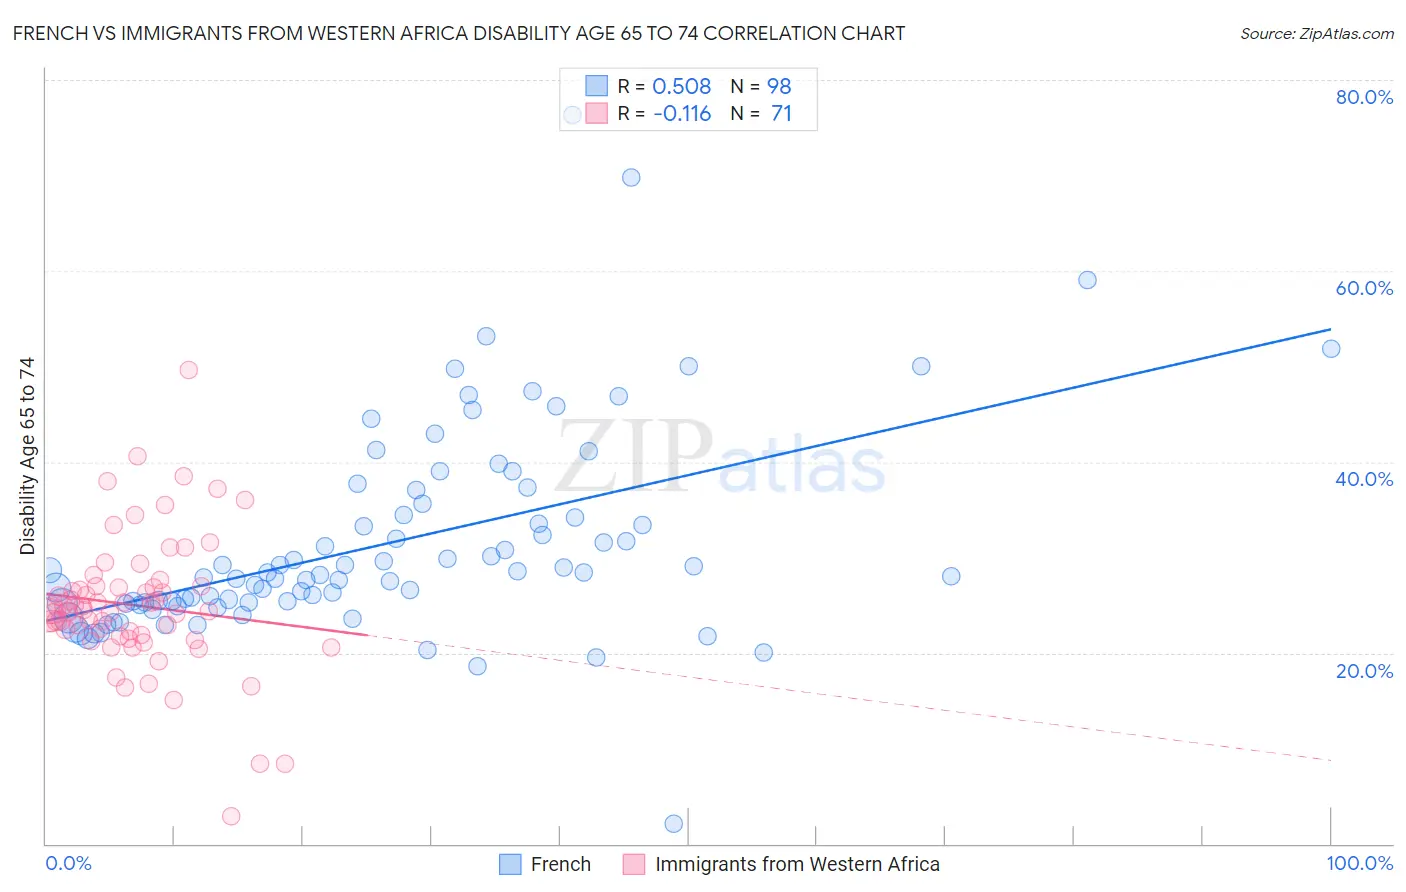 French vs Immigrants from Western Africa Disability Age 65 to 74